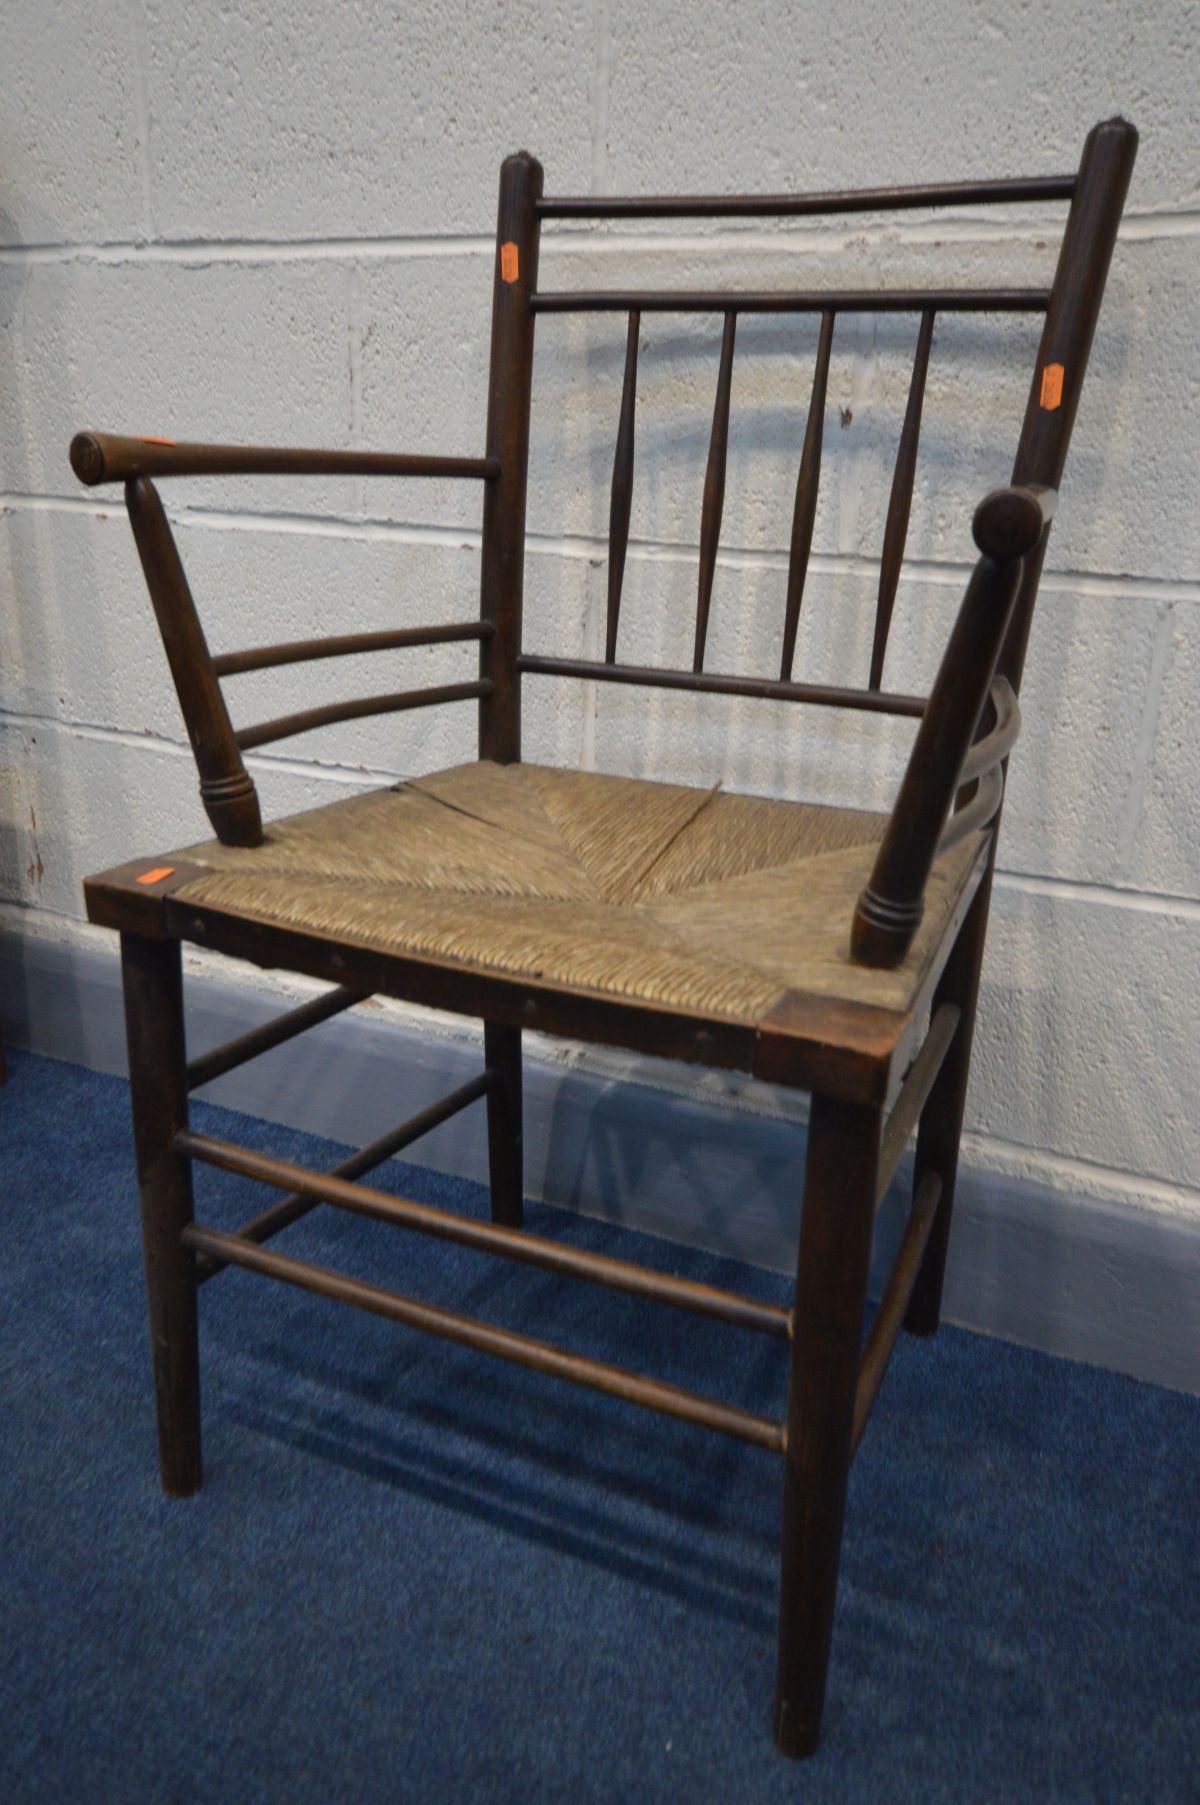 IN THE MANNER OF MORRIS & CO SUFFOLK CHAIR, the back with spindles and horizontal rails, open arm - Image 2 of 4